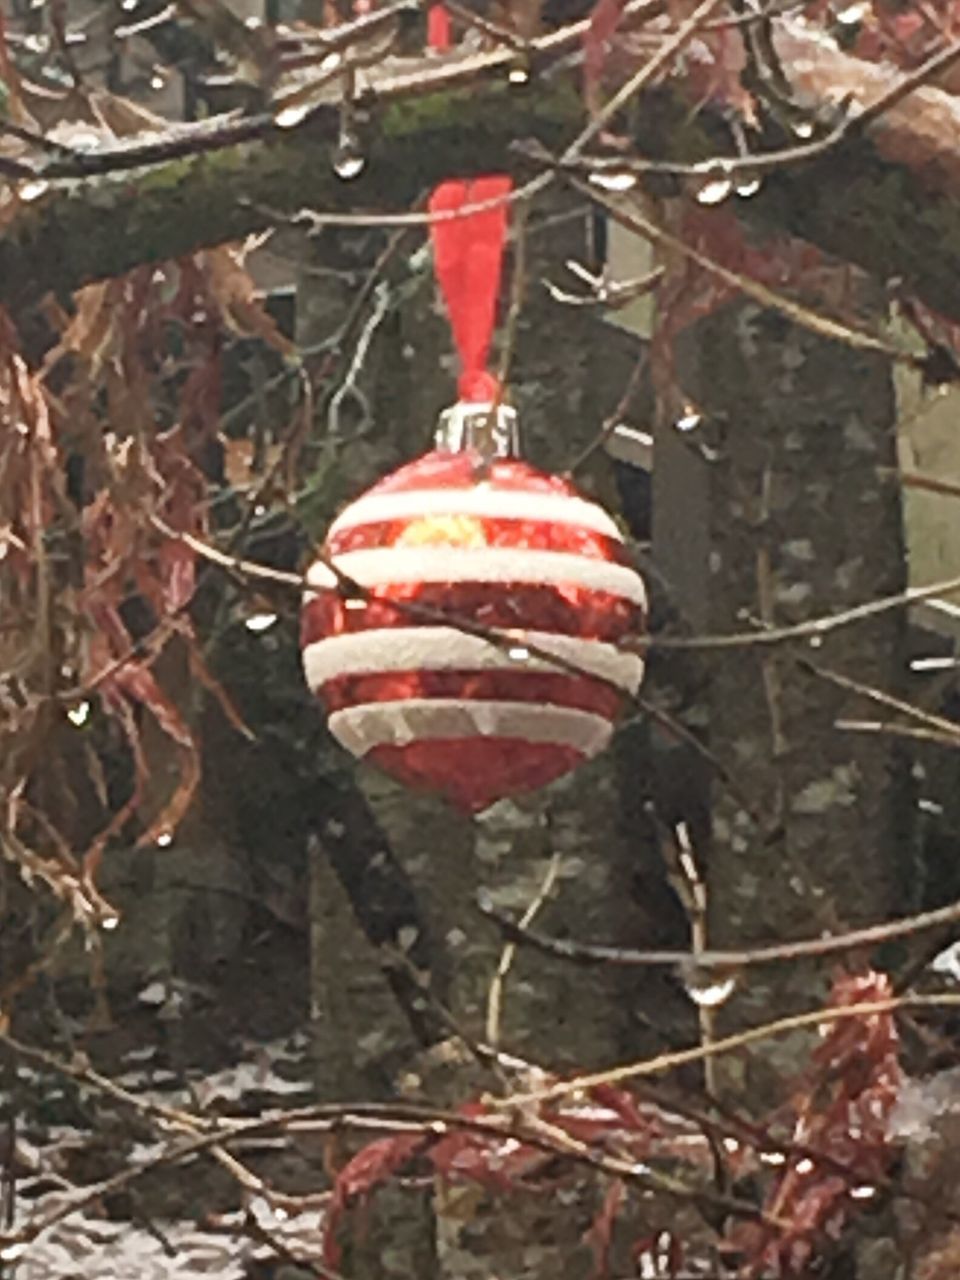 CLOSE-UP OF RED HANGING ON BRANCH